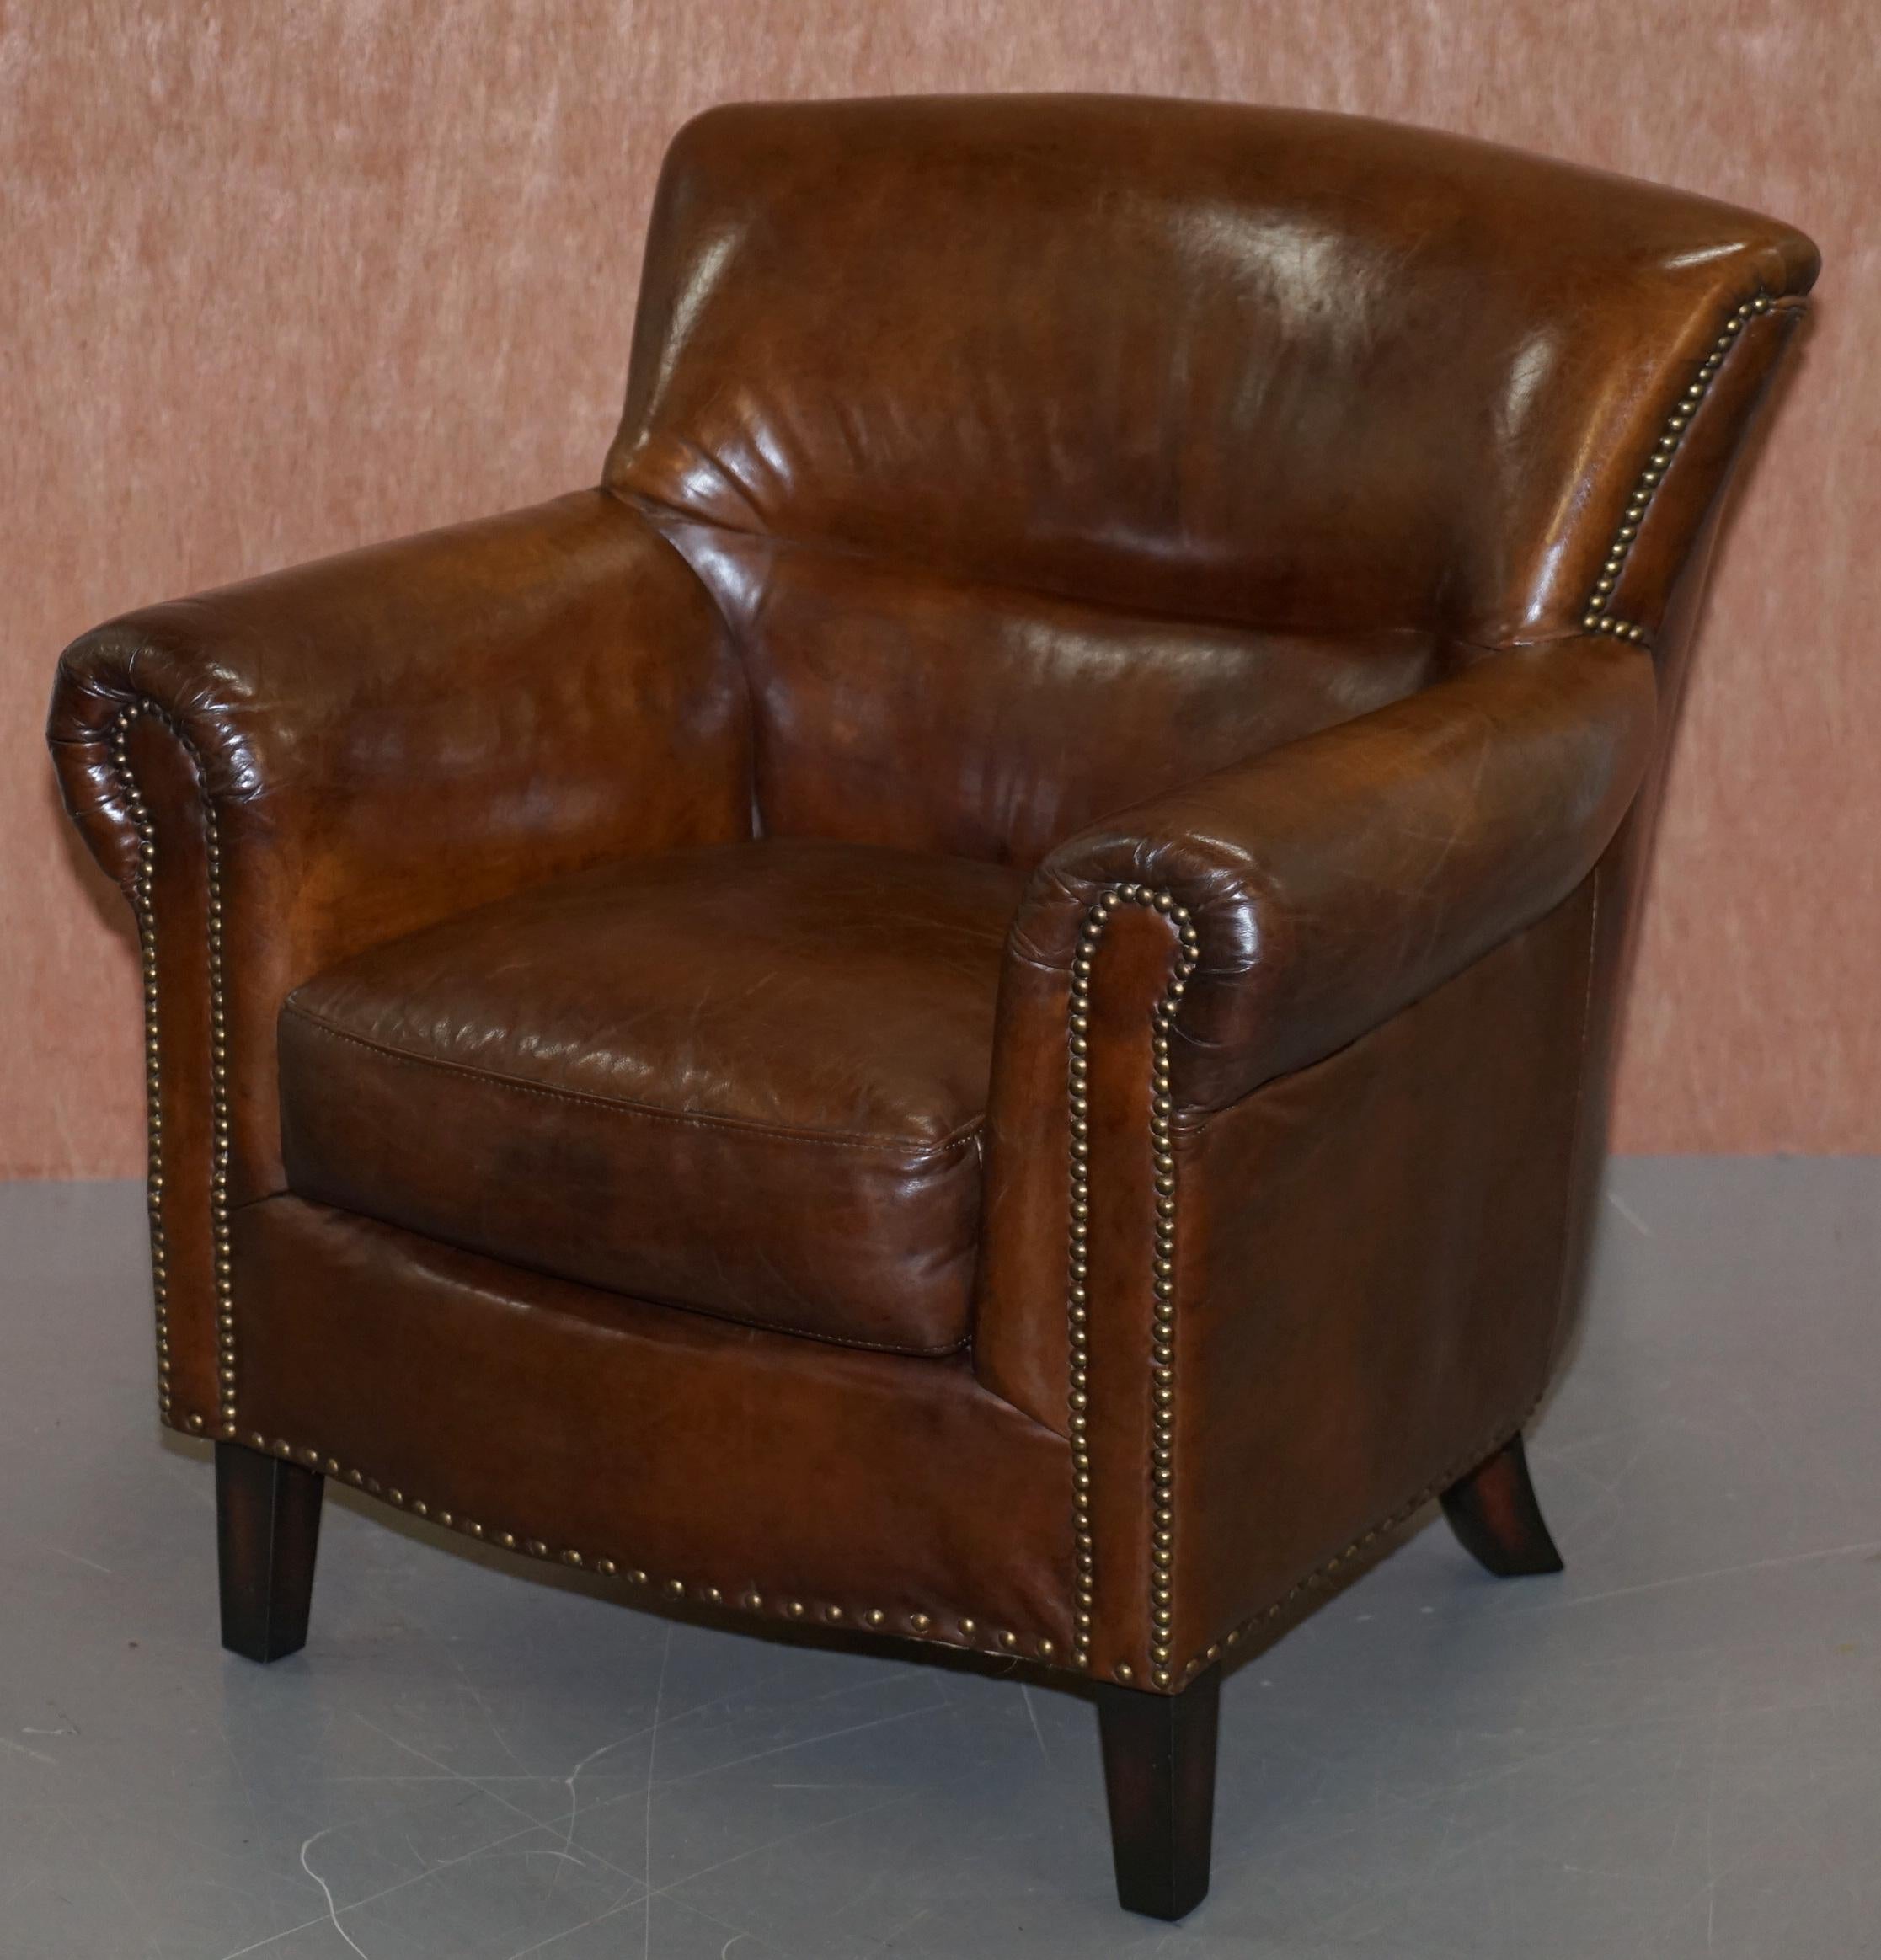 Modern Medium Size Timothy Oulton Halo Brown Leather Armchair Part Large Suite Must See